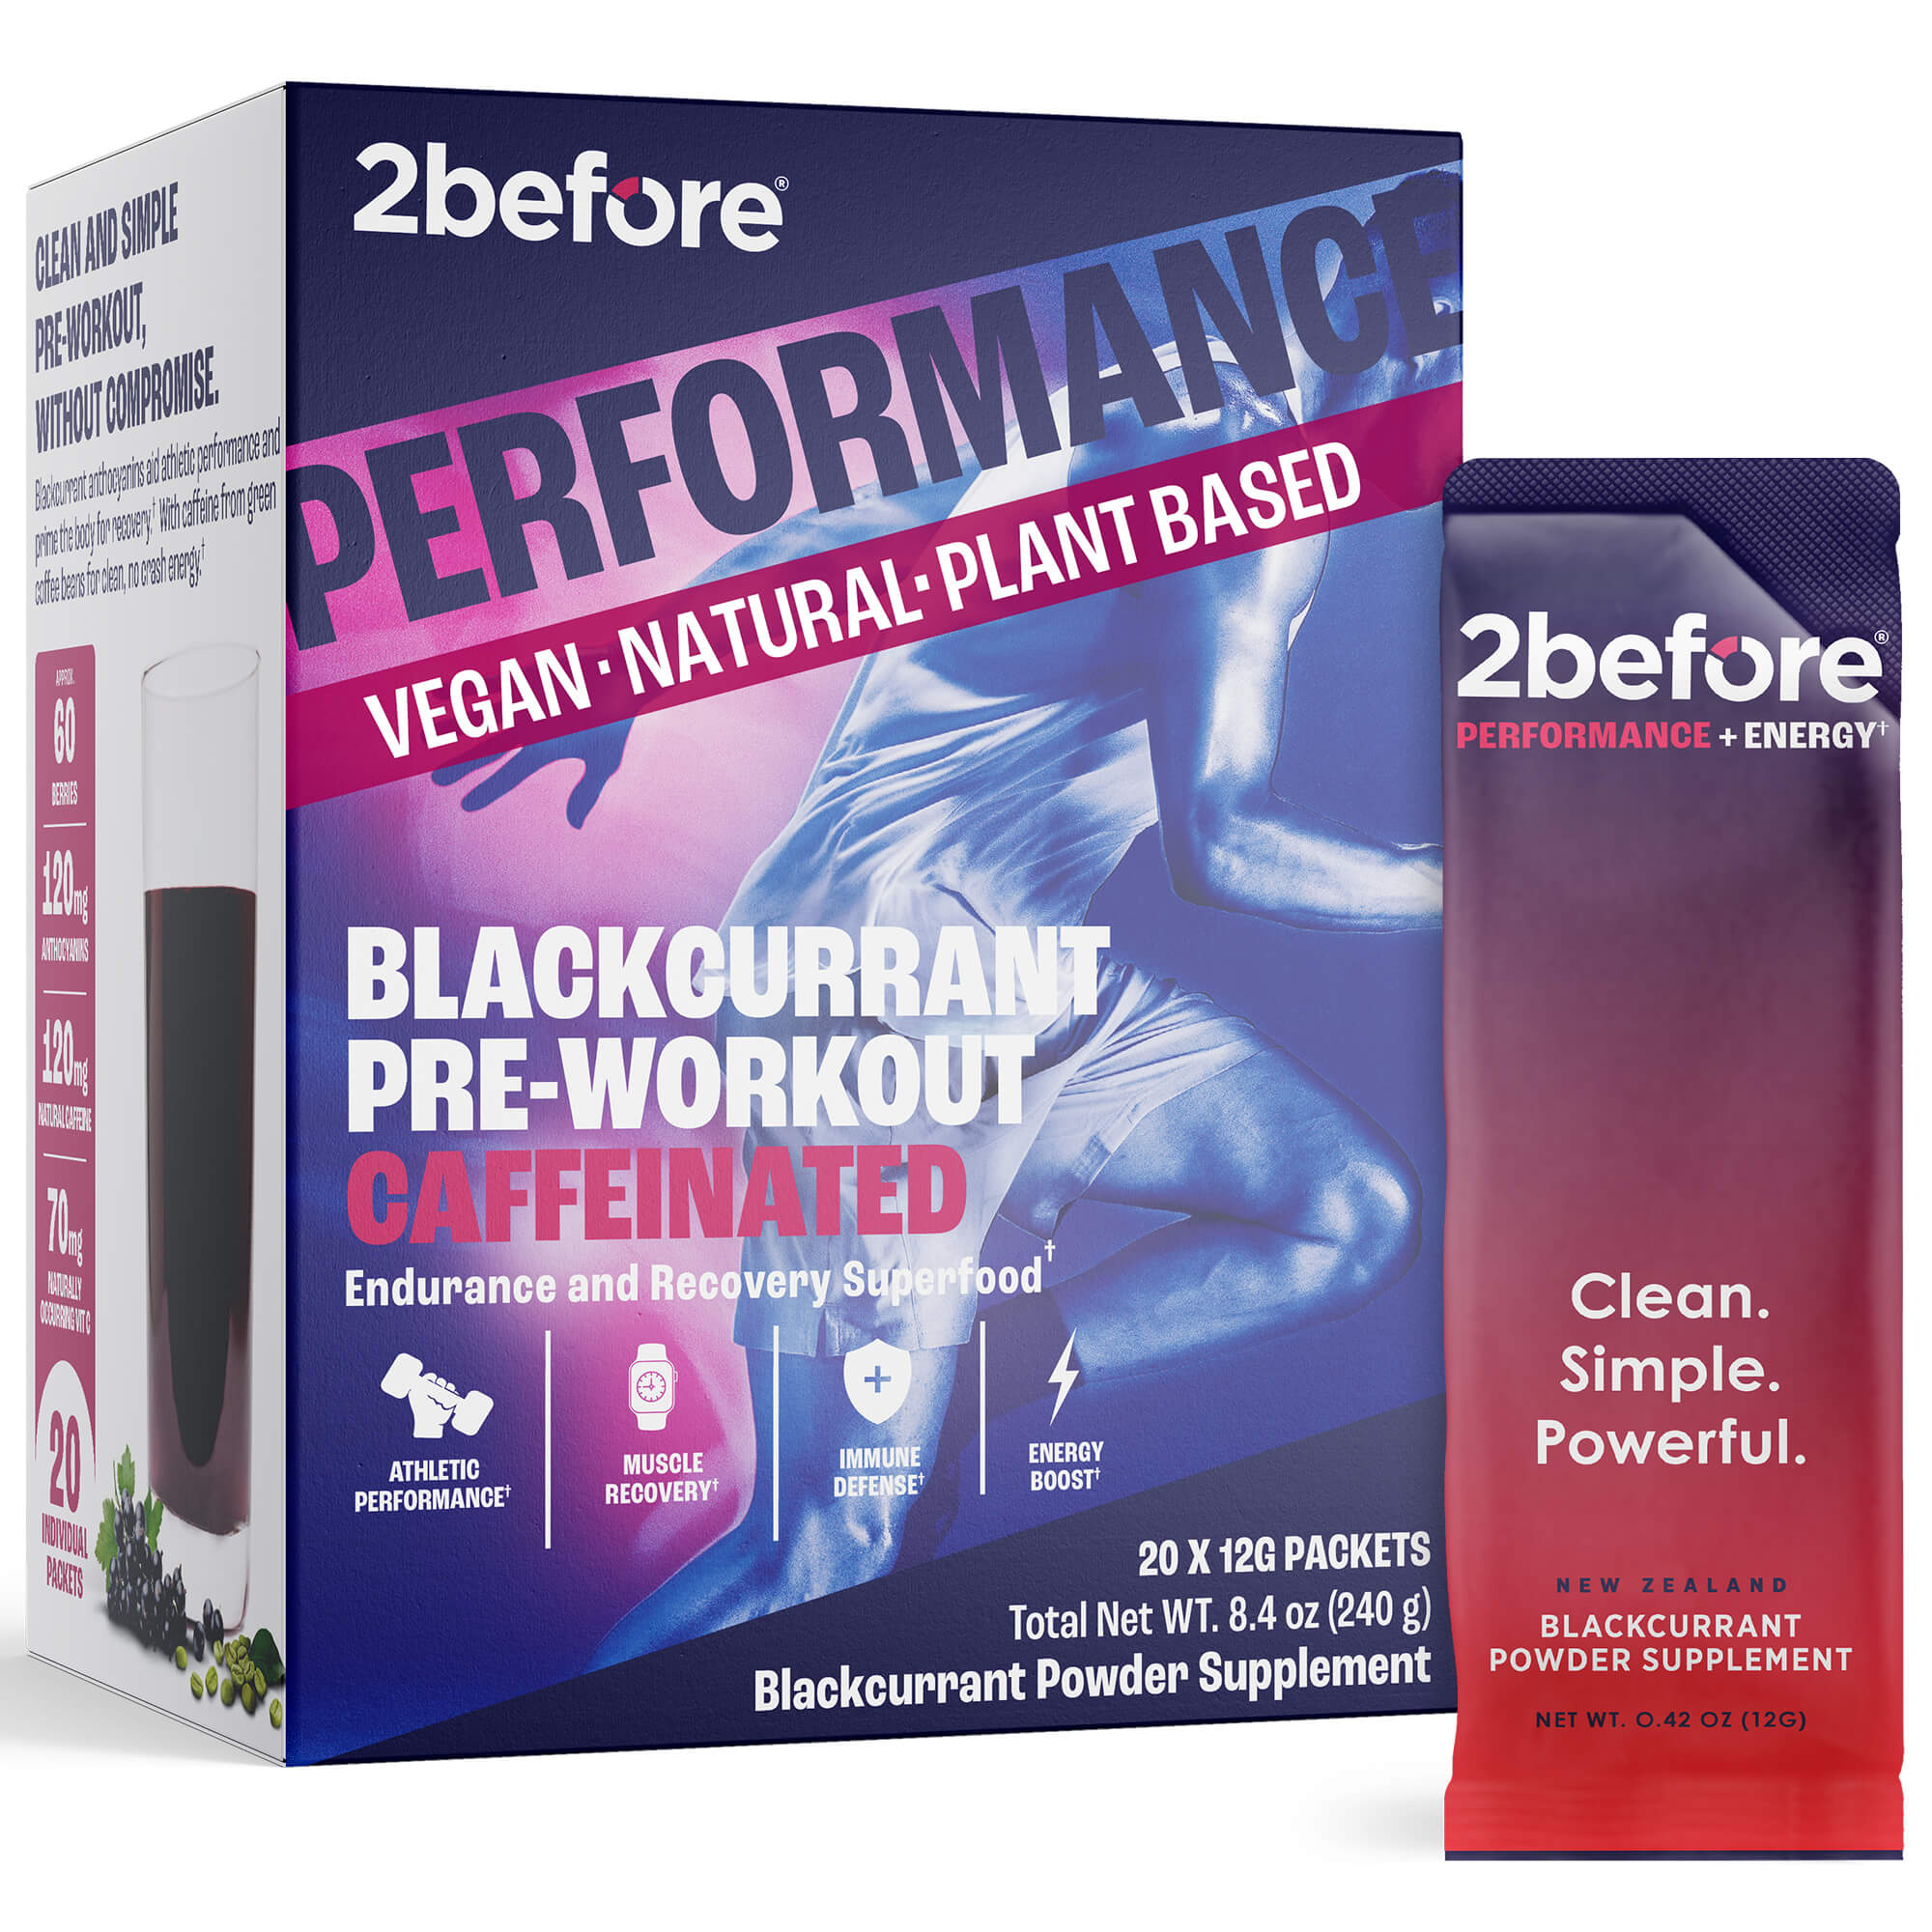 2before Blackcurrant Pre-Workout Caffeinated (20 pack)